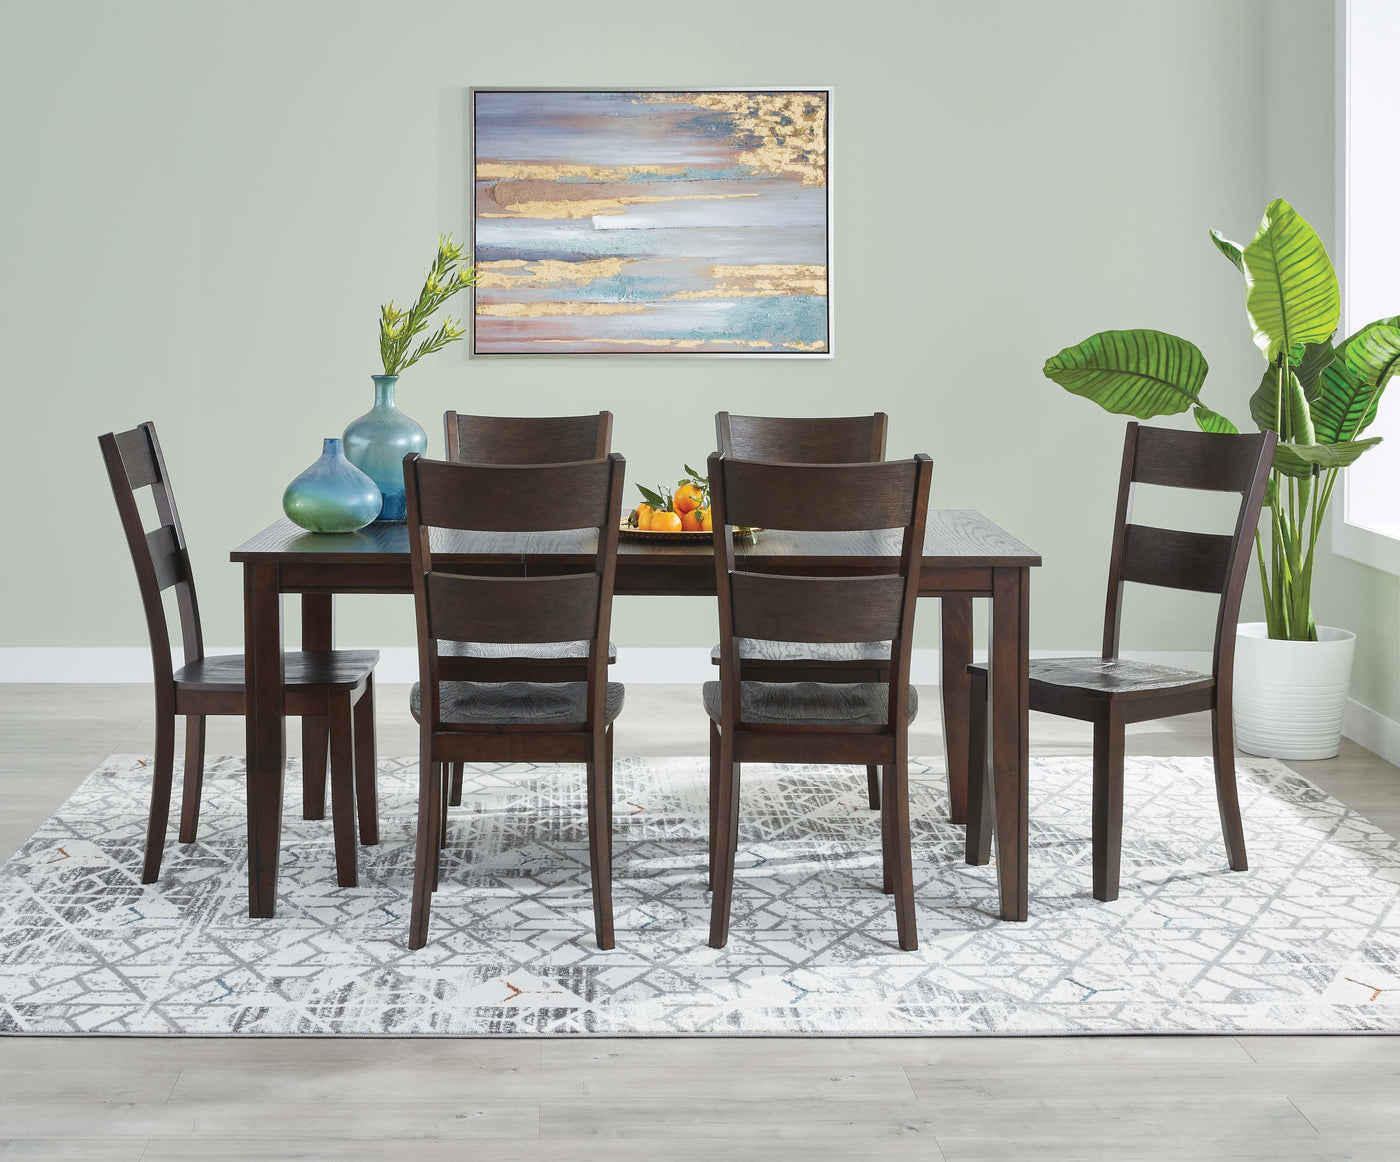 Holland 7-Piece Dining Set - Dark Oak with Wire-Brushed Finish